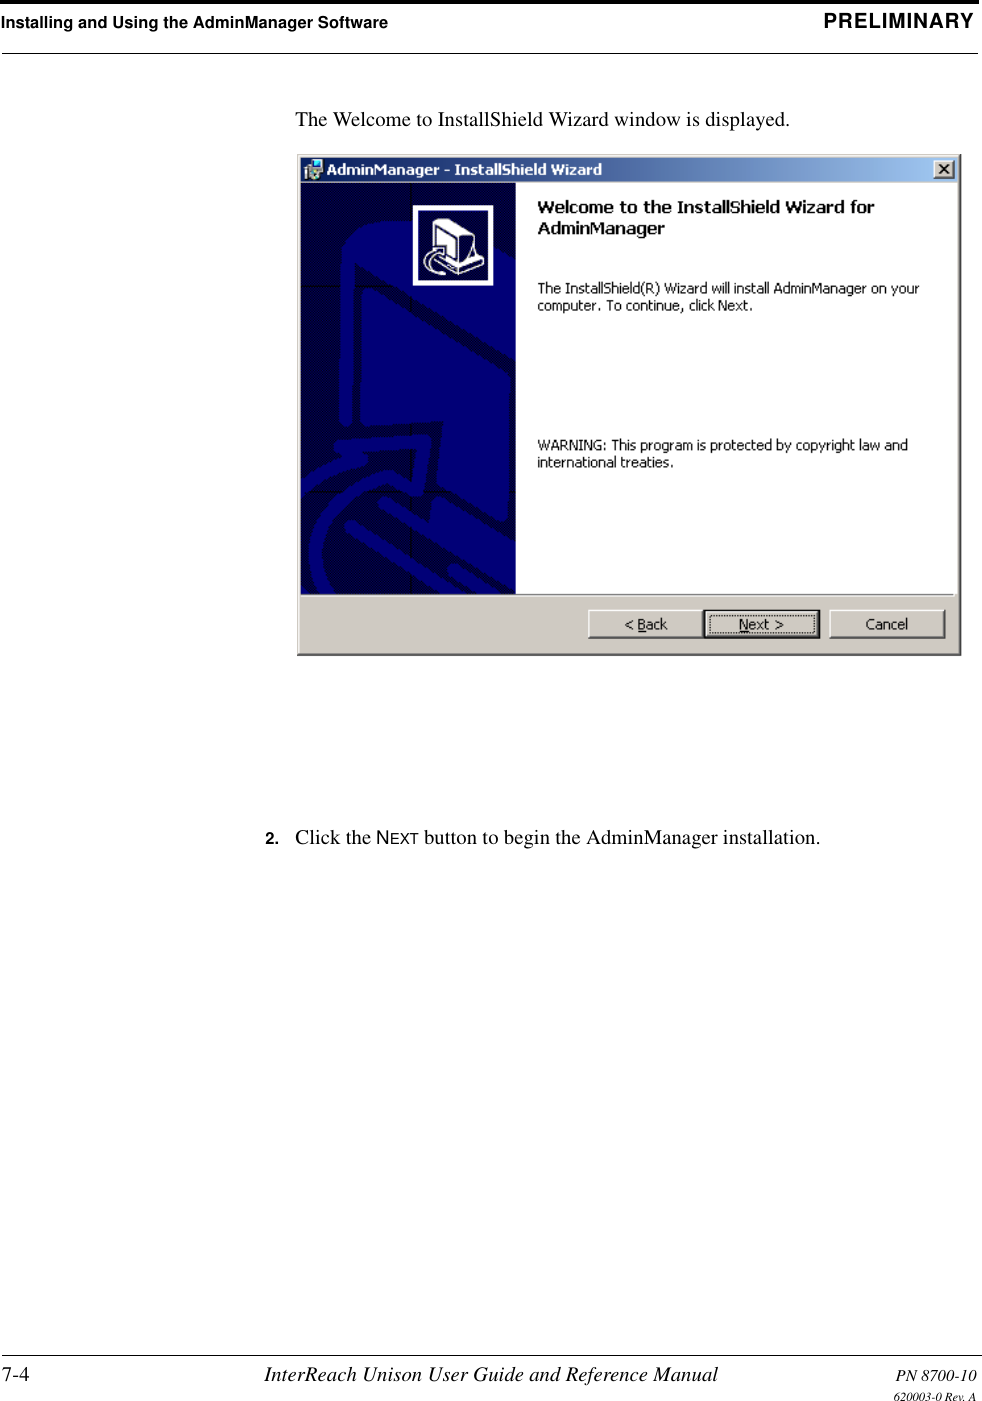 Installing and Using the AdminManager Software PRELIMINARY7-4 InterReach Unison User Guide and Reference Manual PN 8700-10620003-0 Rev. AThe Welcome to InstallShield Wizard window is displayed.2. Click the NEXT button to begin the AdminManager installation.